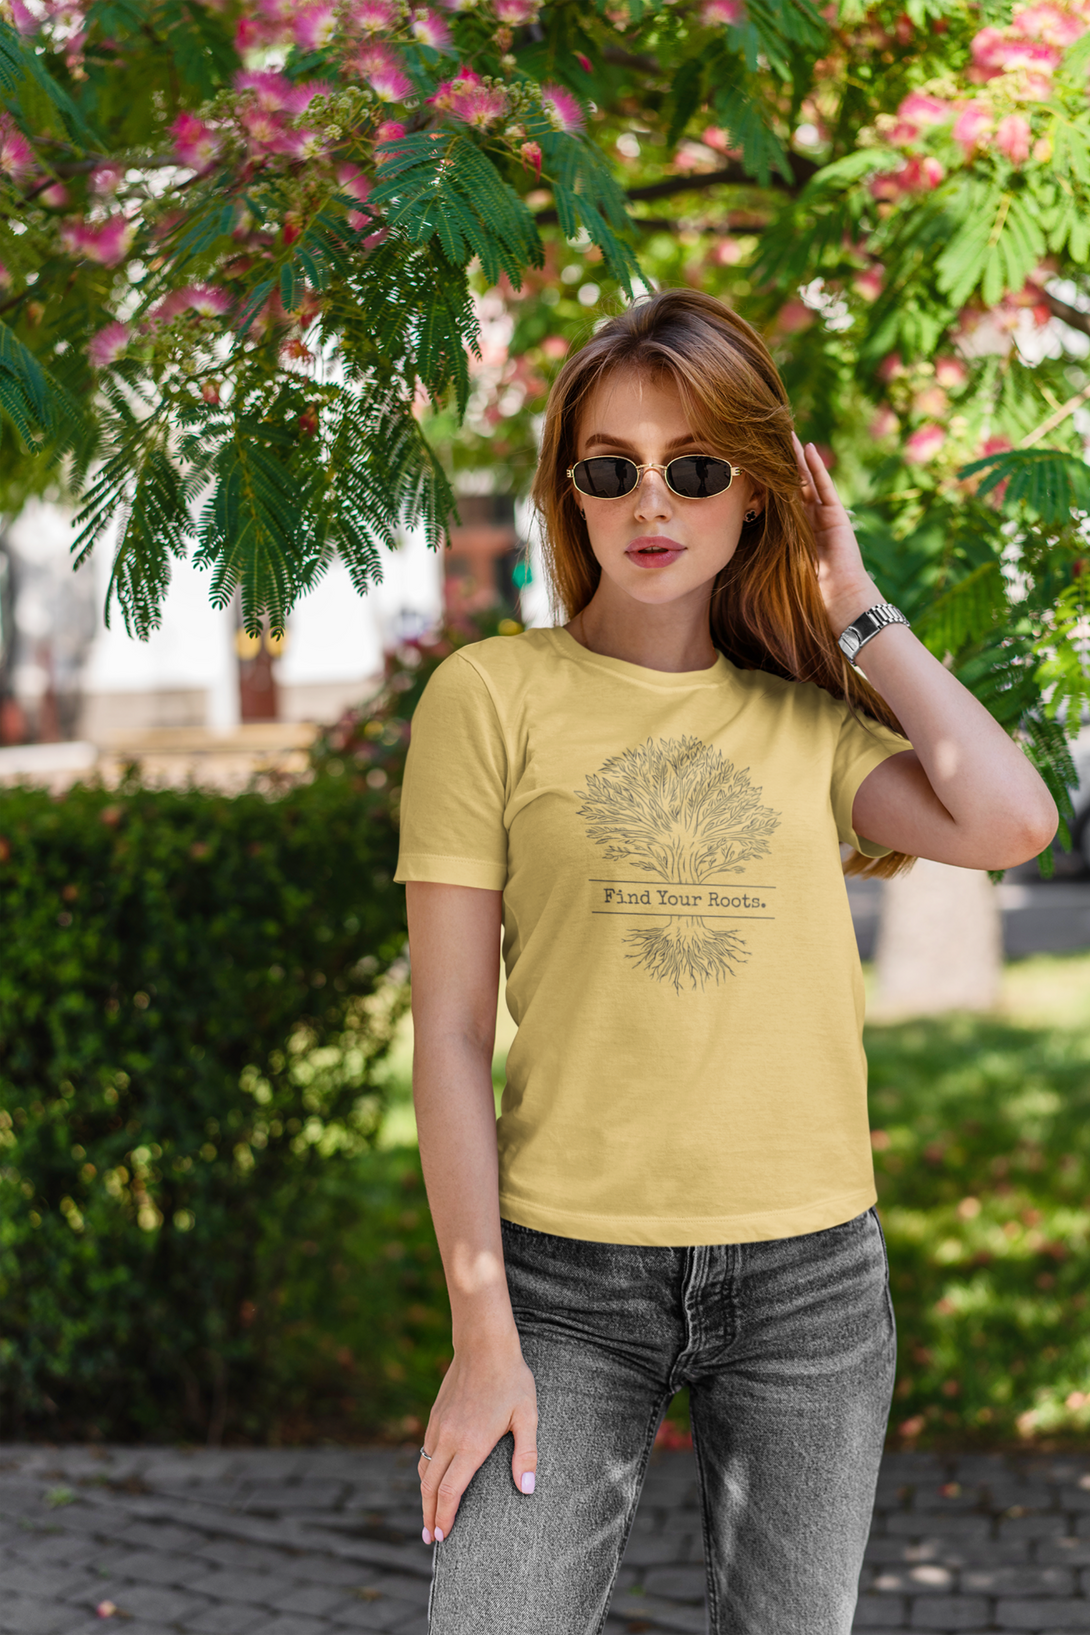 Find Your Roots Printed T-Shirt For Women - WowWaves